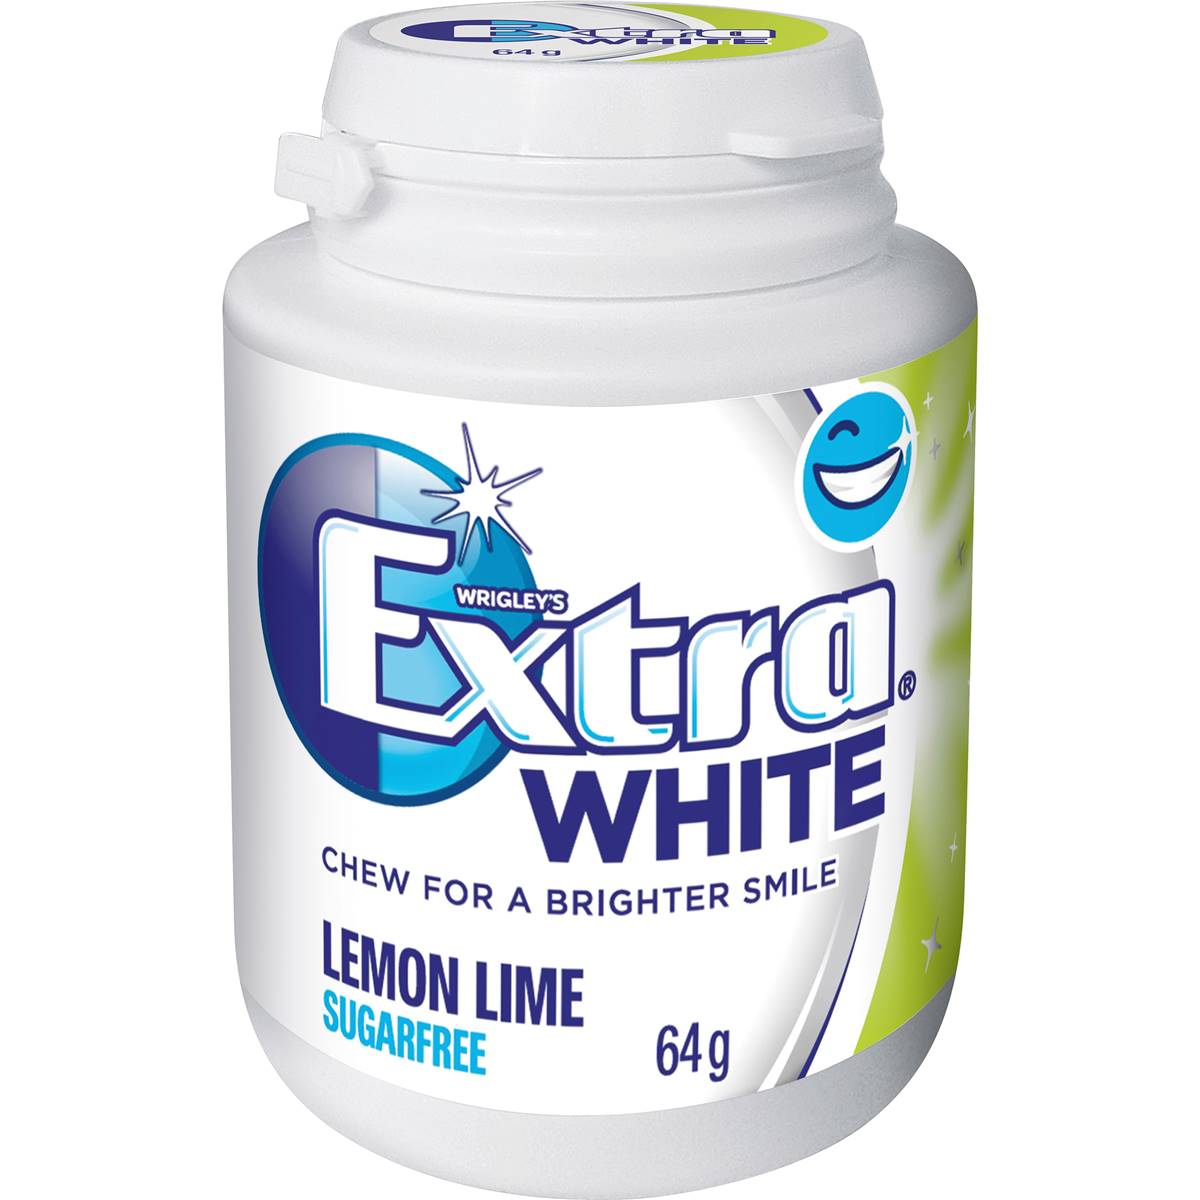 Calories in Extra White Lemon Lime Sugar Free Chewing Gum Bottle